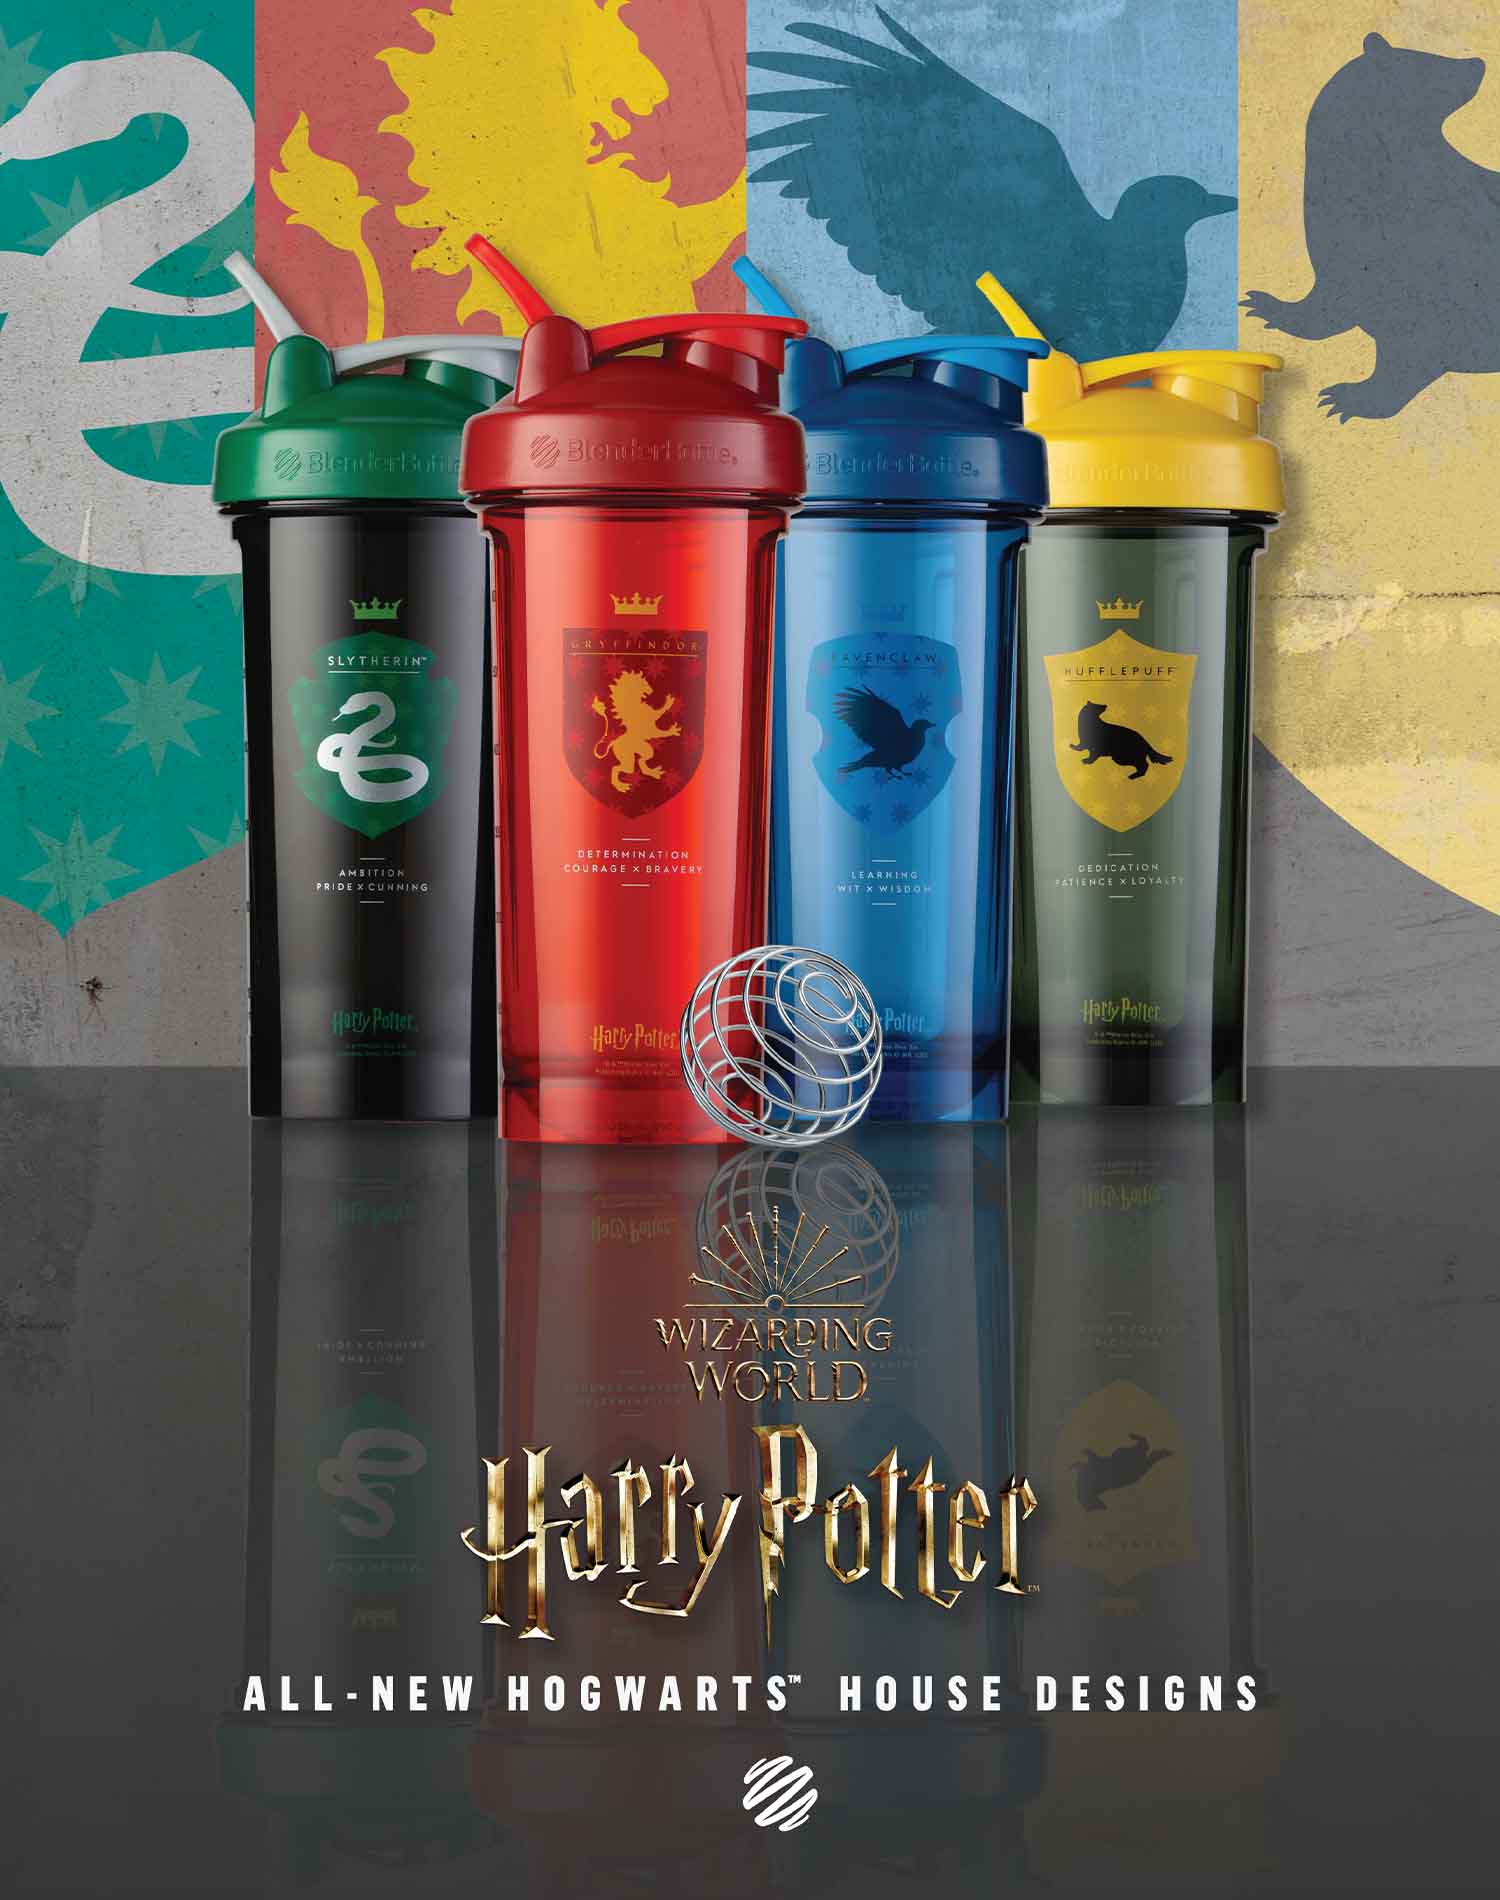 BlenderBottle - Magic and merriment! Celebrate in wizarding style with a  Harry Potter Yule Ball shaker, BOGO50 until 12/5 and while supplies last.  Shop now -->  #WizardingWorldChristmas #HarryPotter  #blackfriday #blenderbottle